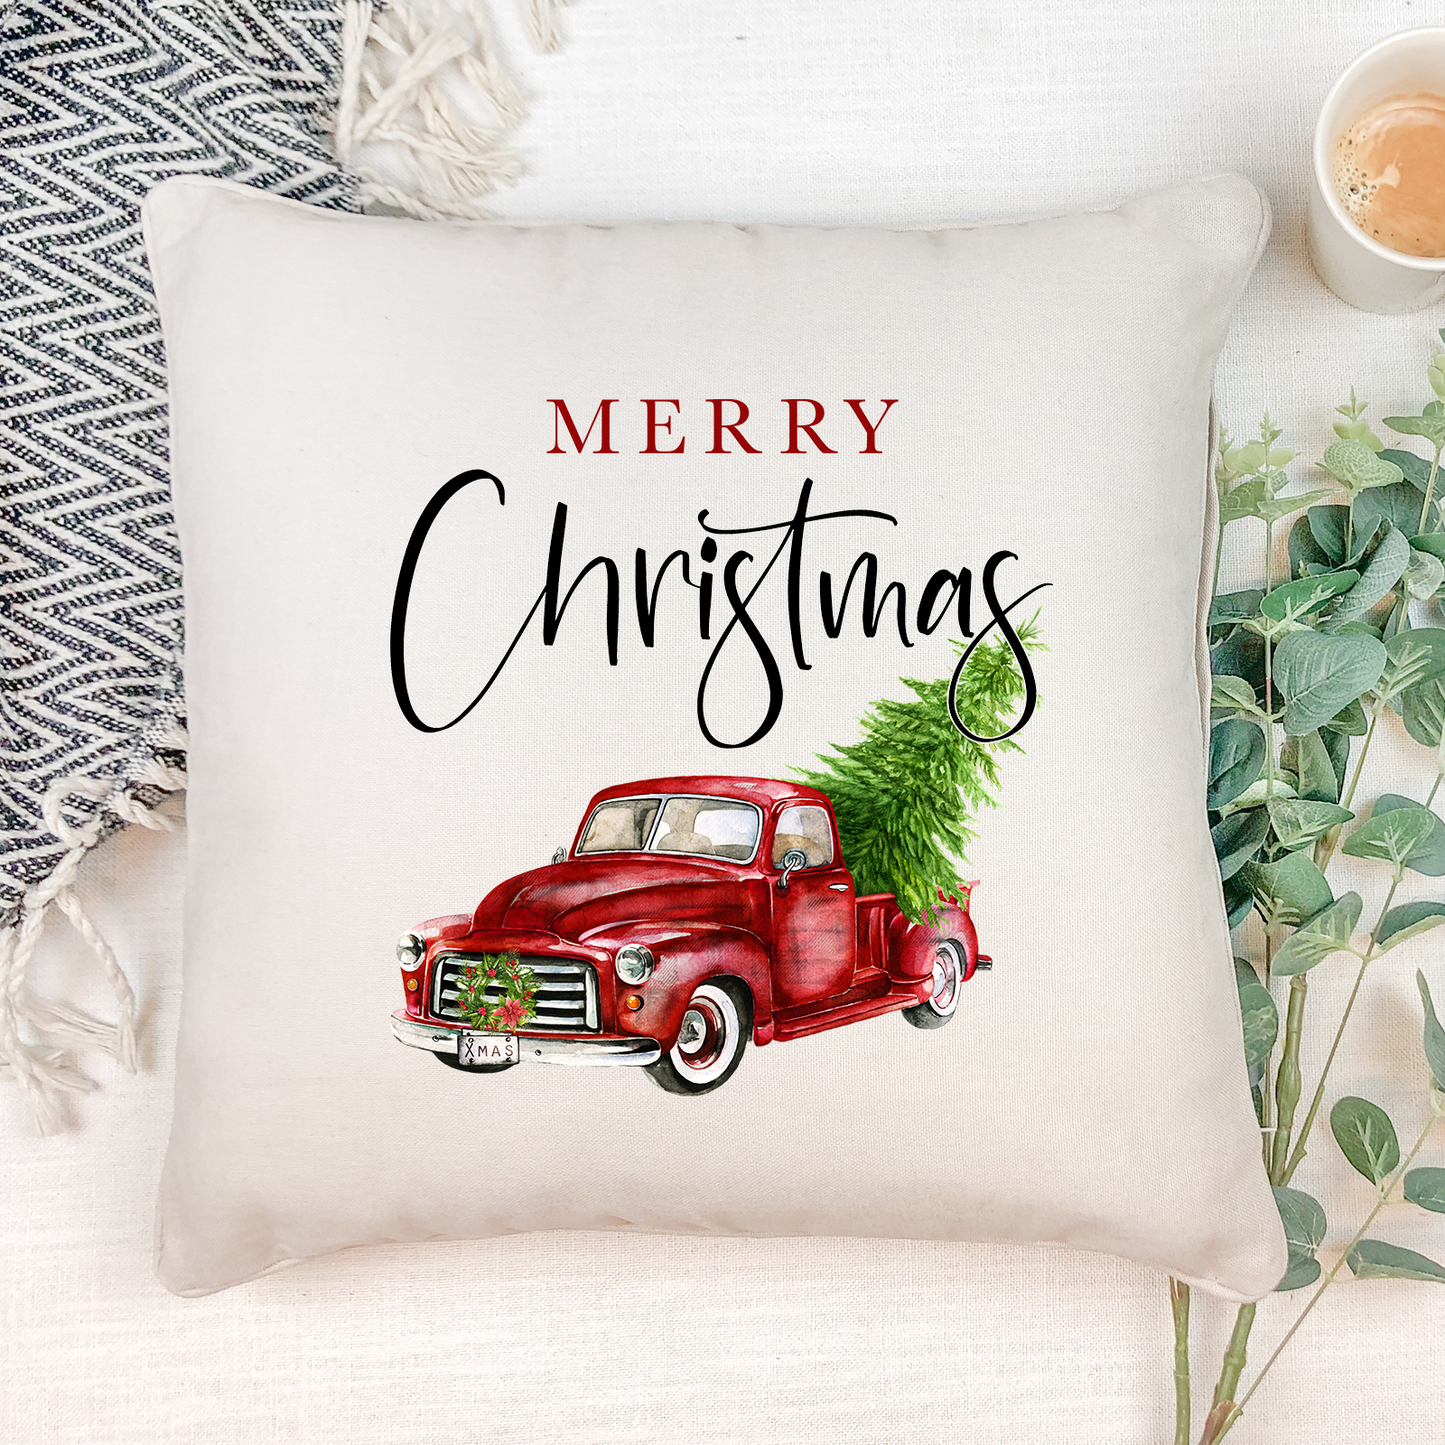 Merry Christmas Red Truck Pillow